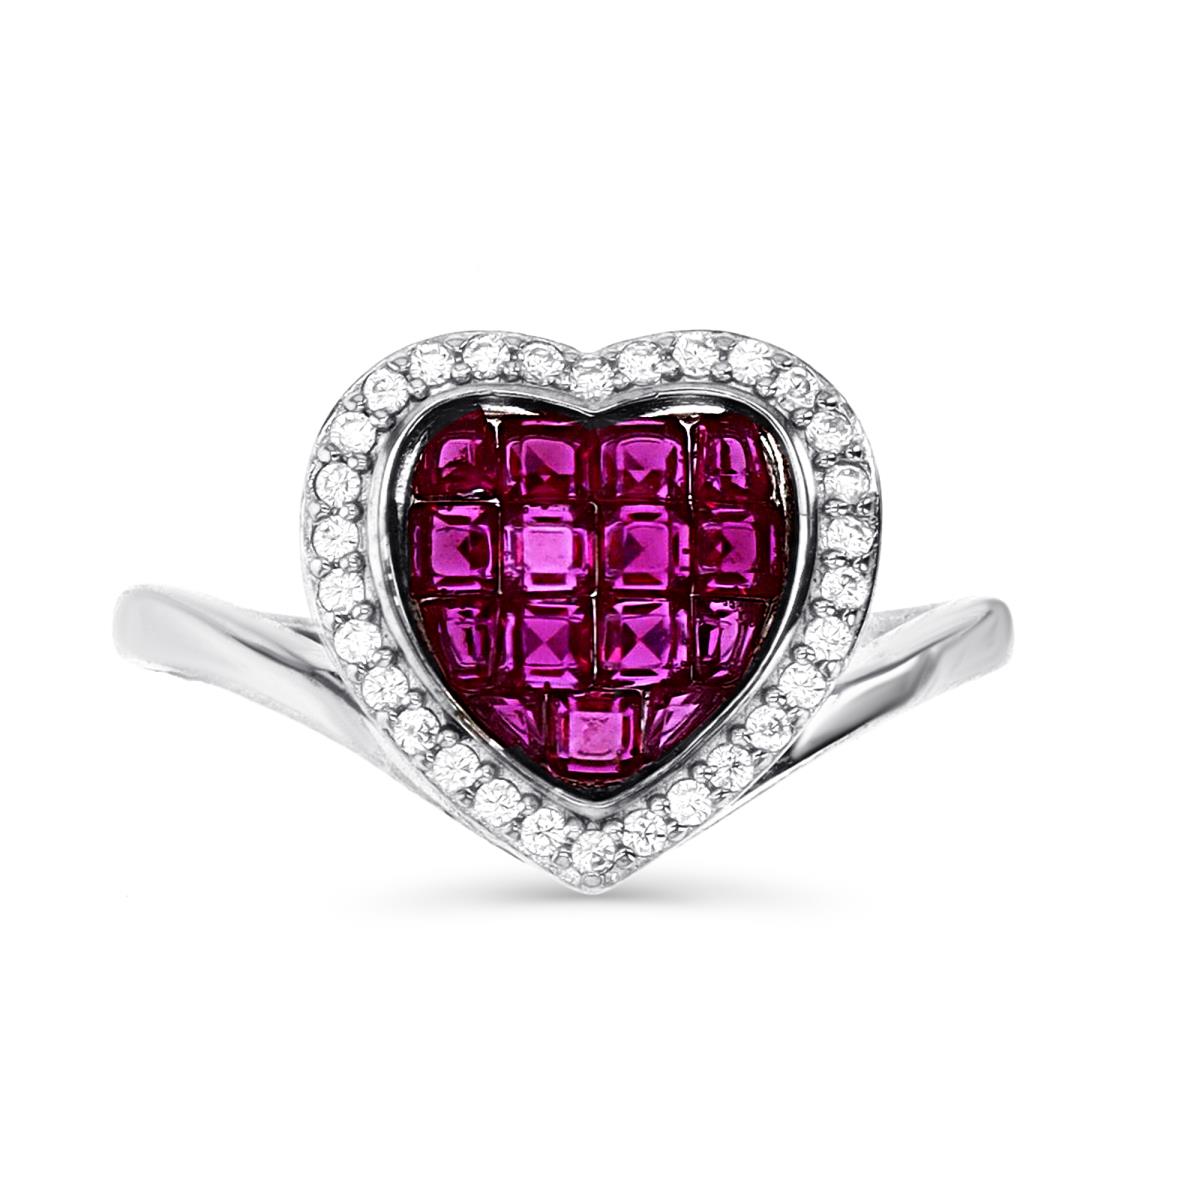 Sterling Silver Rhodium 13X12MM Polished CR Ruby & White CZ Heart Bezel Ring